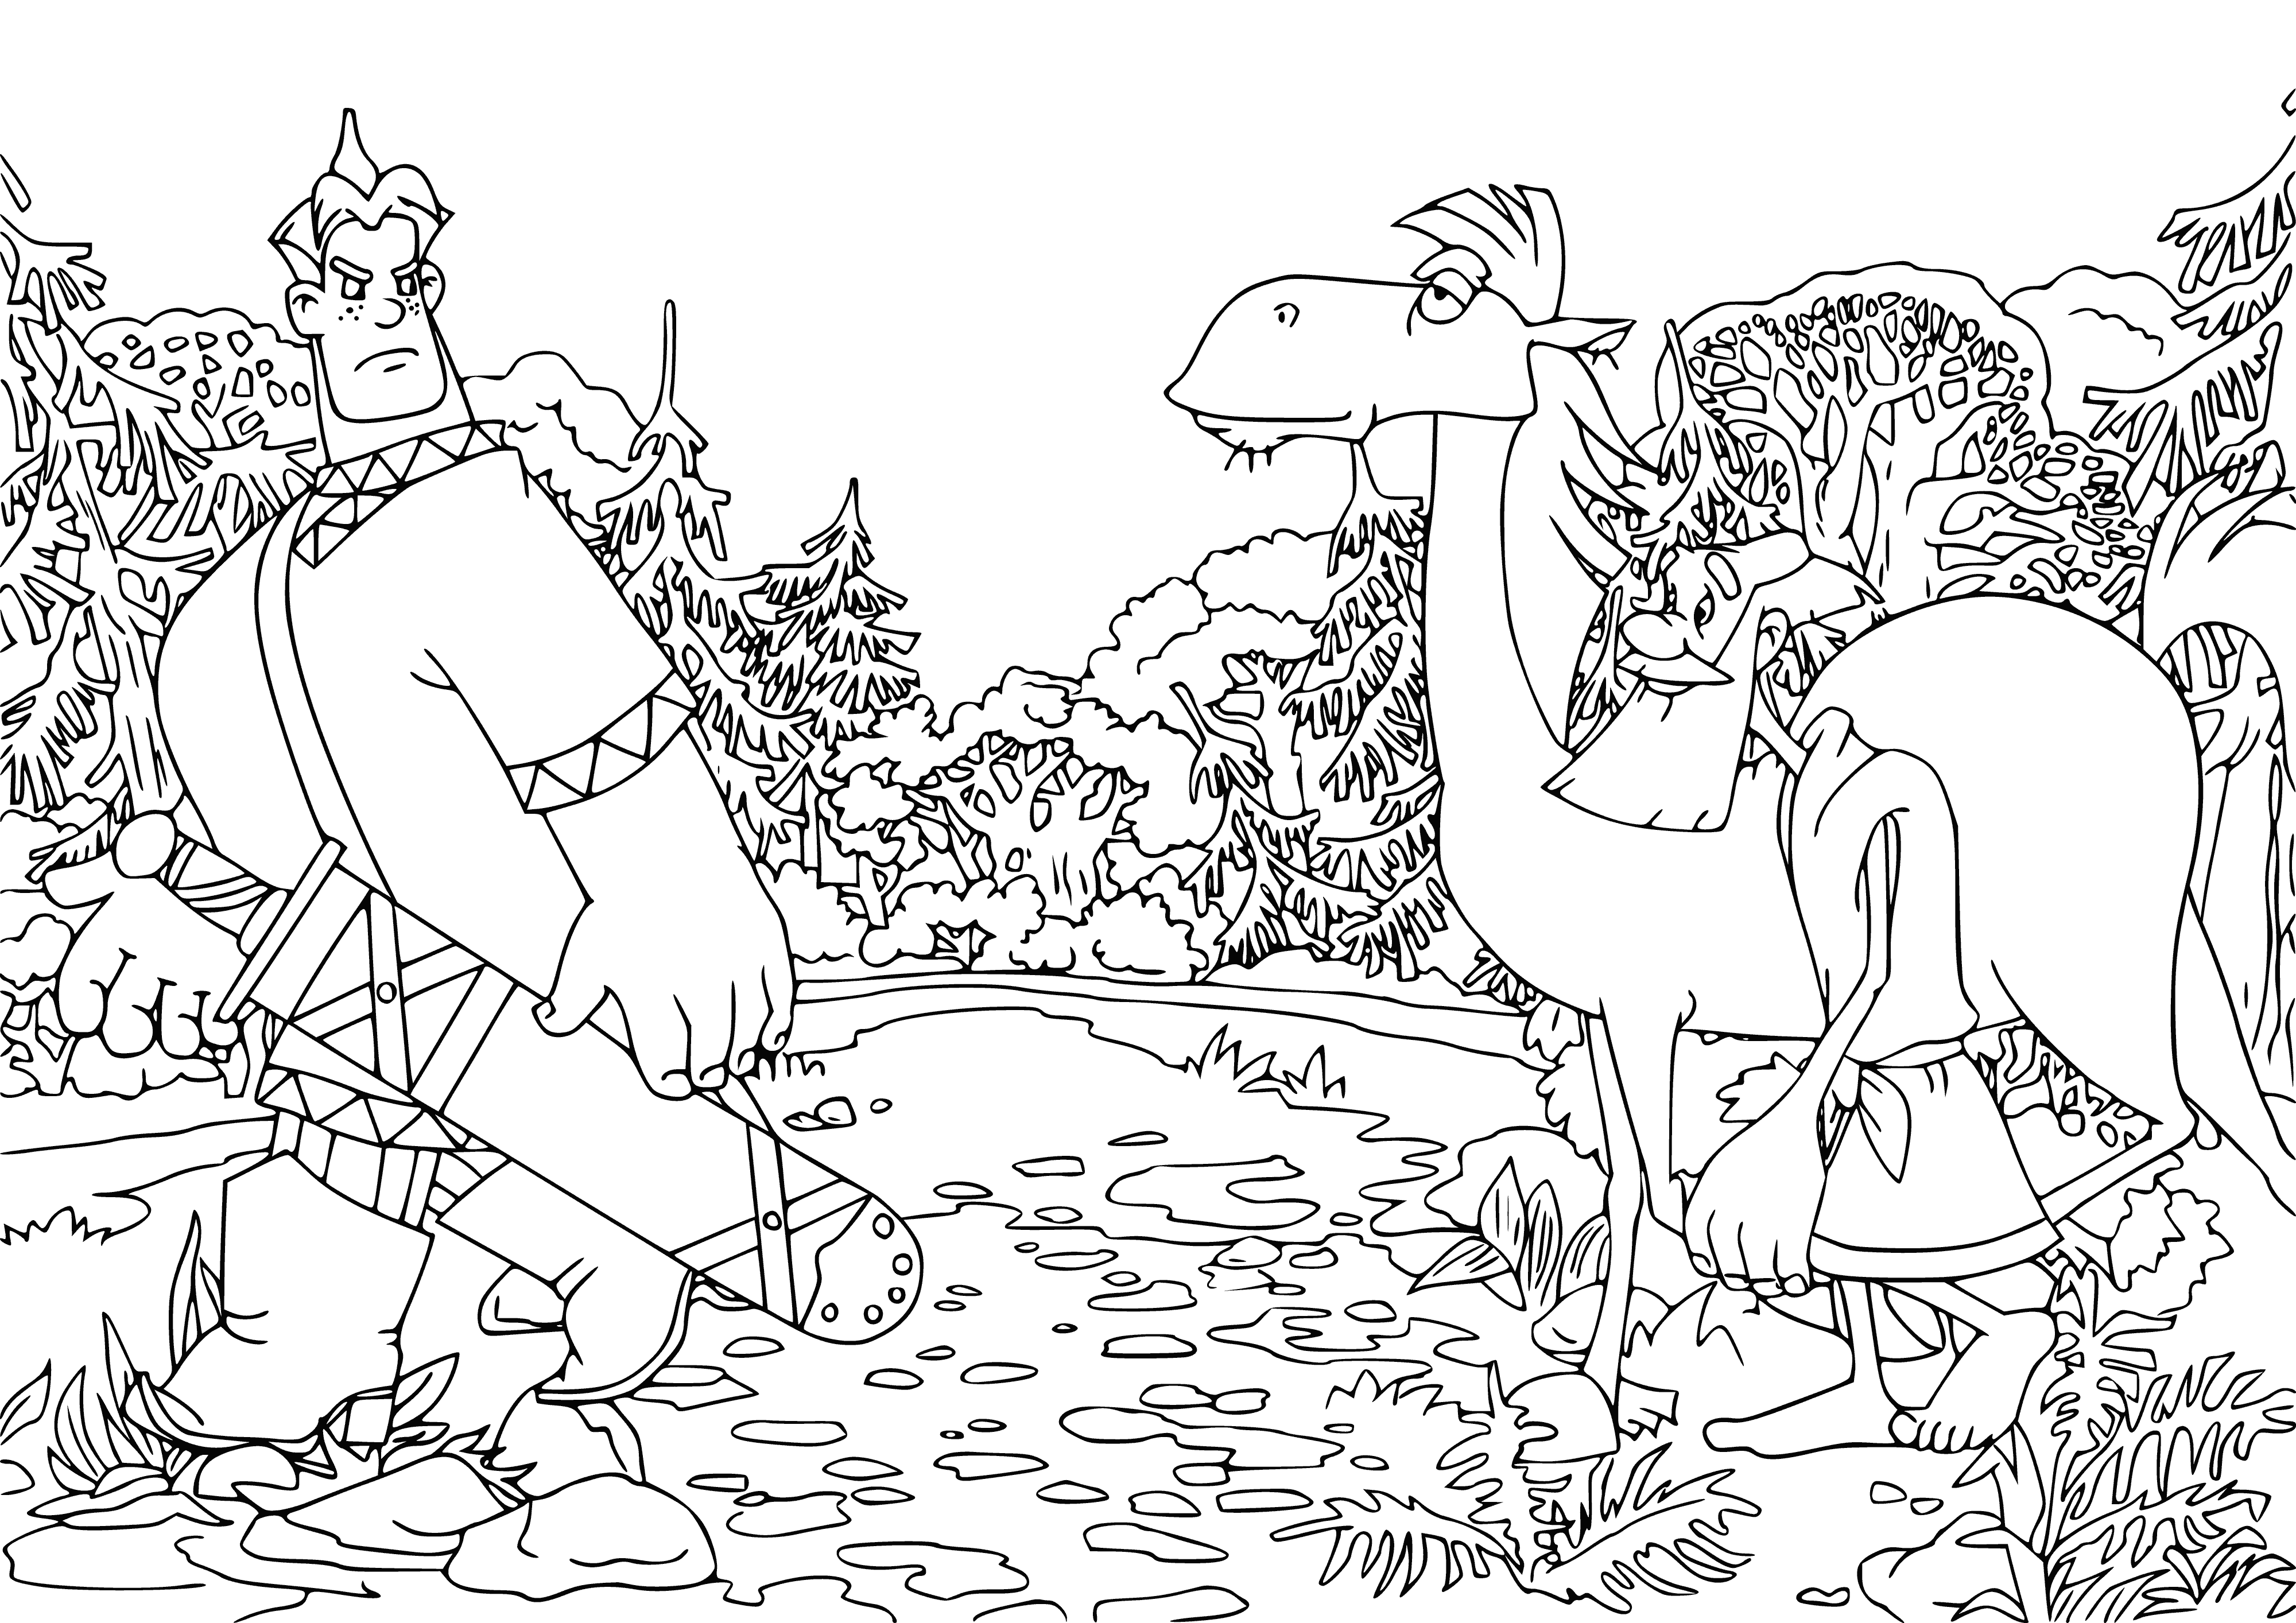 coloring page: Alyosha Popovich & Tugarin riding on a horse, swords in hand, daringly looking ahead.